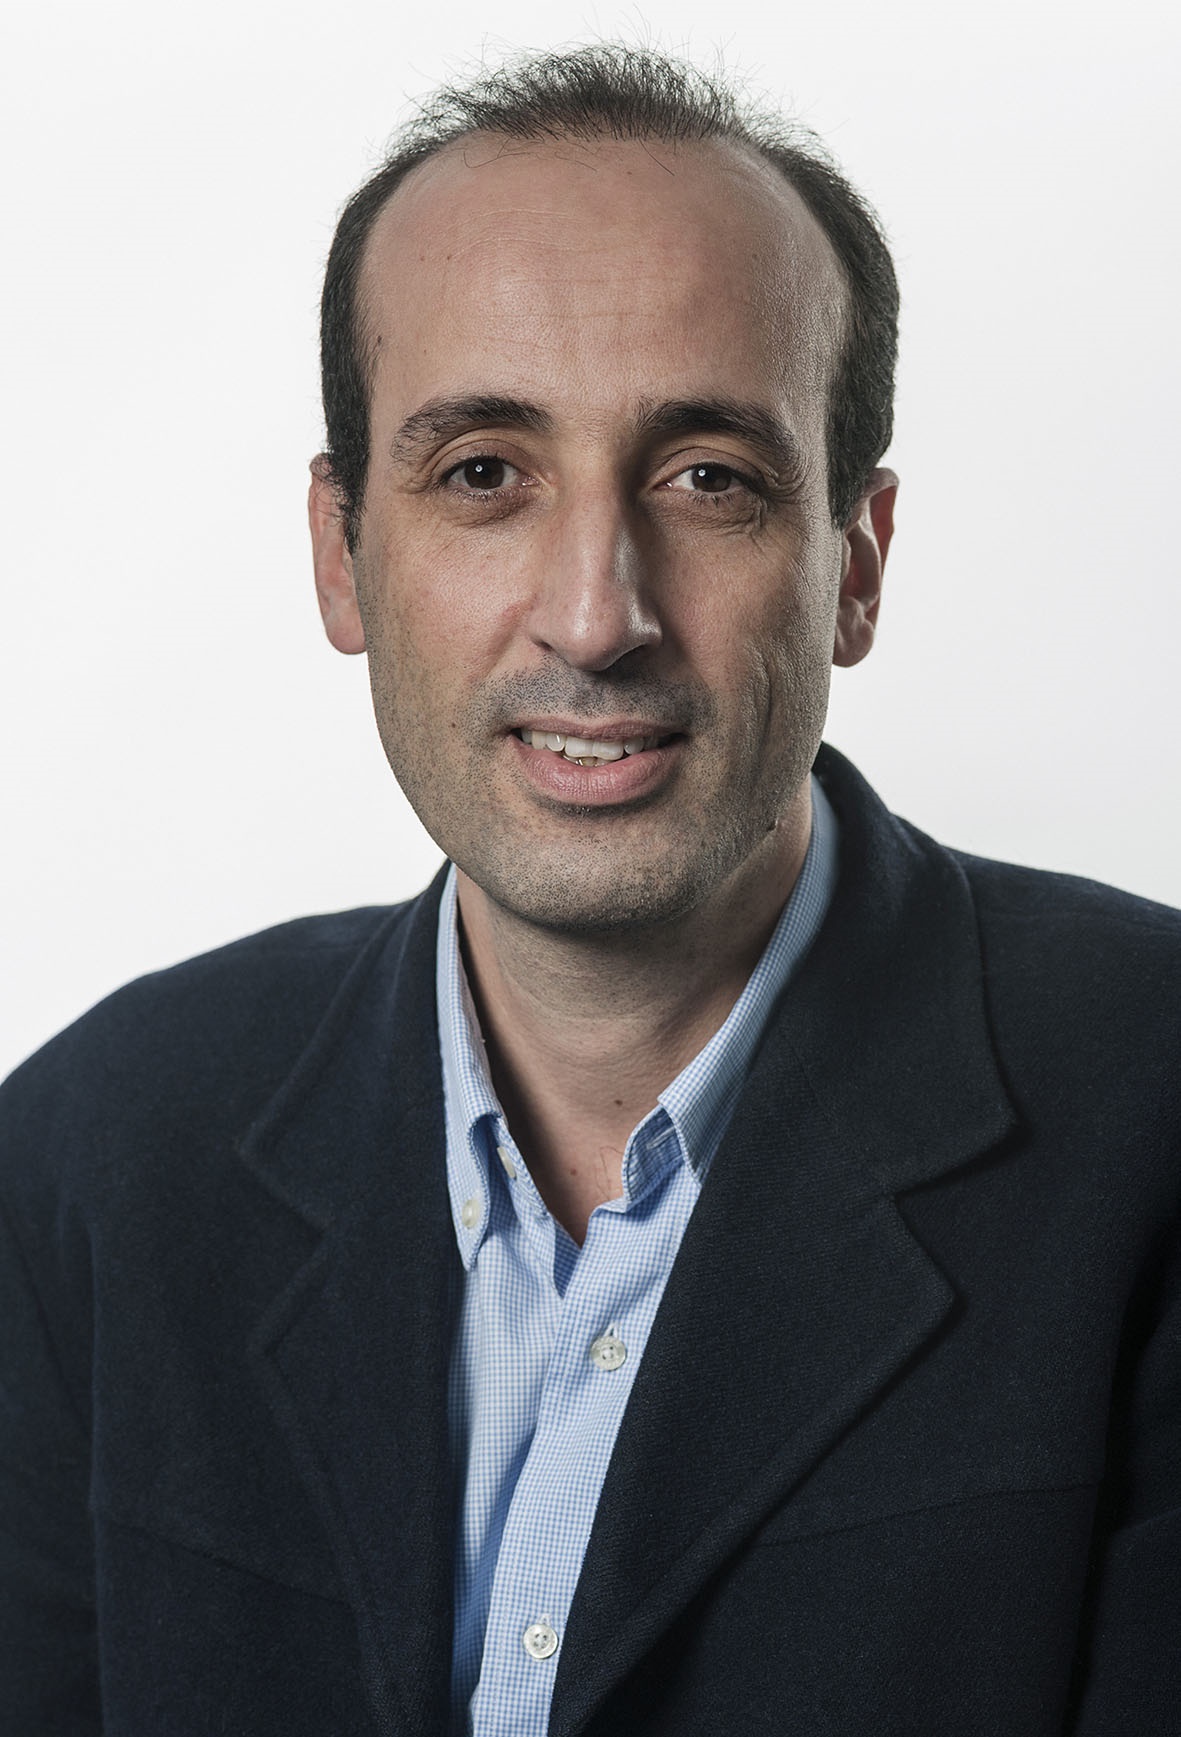 Dr. Omar Elloumi, of Nokia, and oneM2M’s Technical Plenary chair